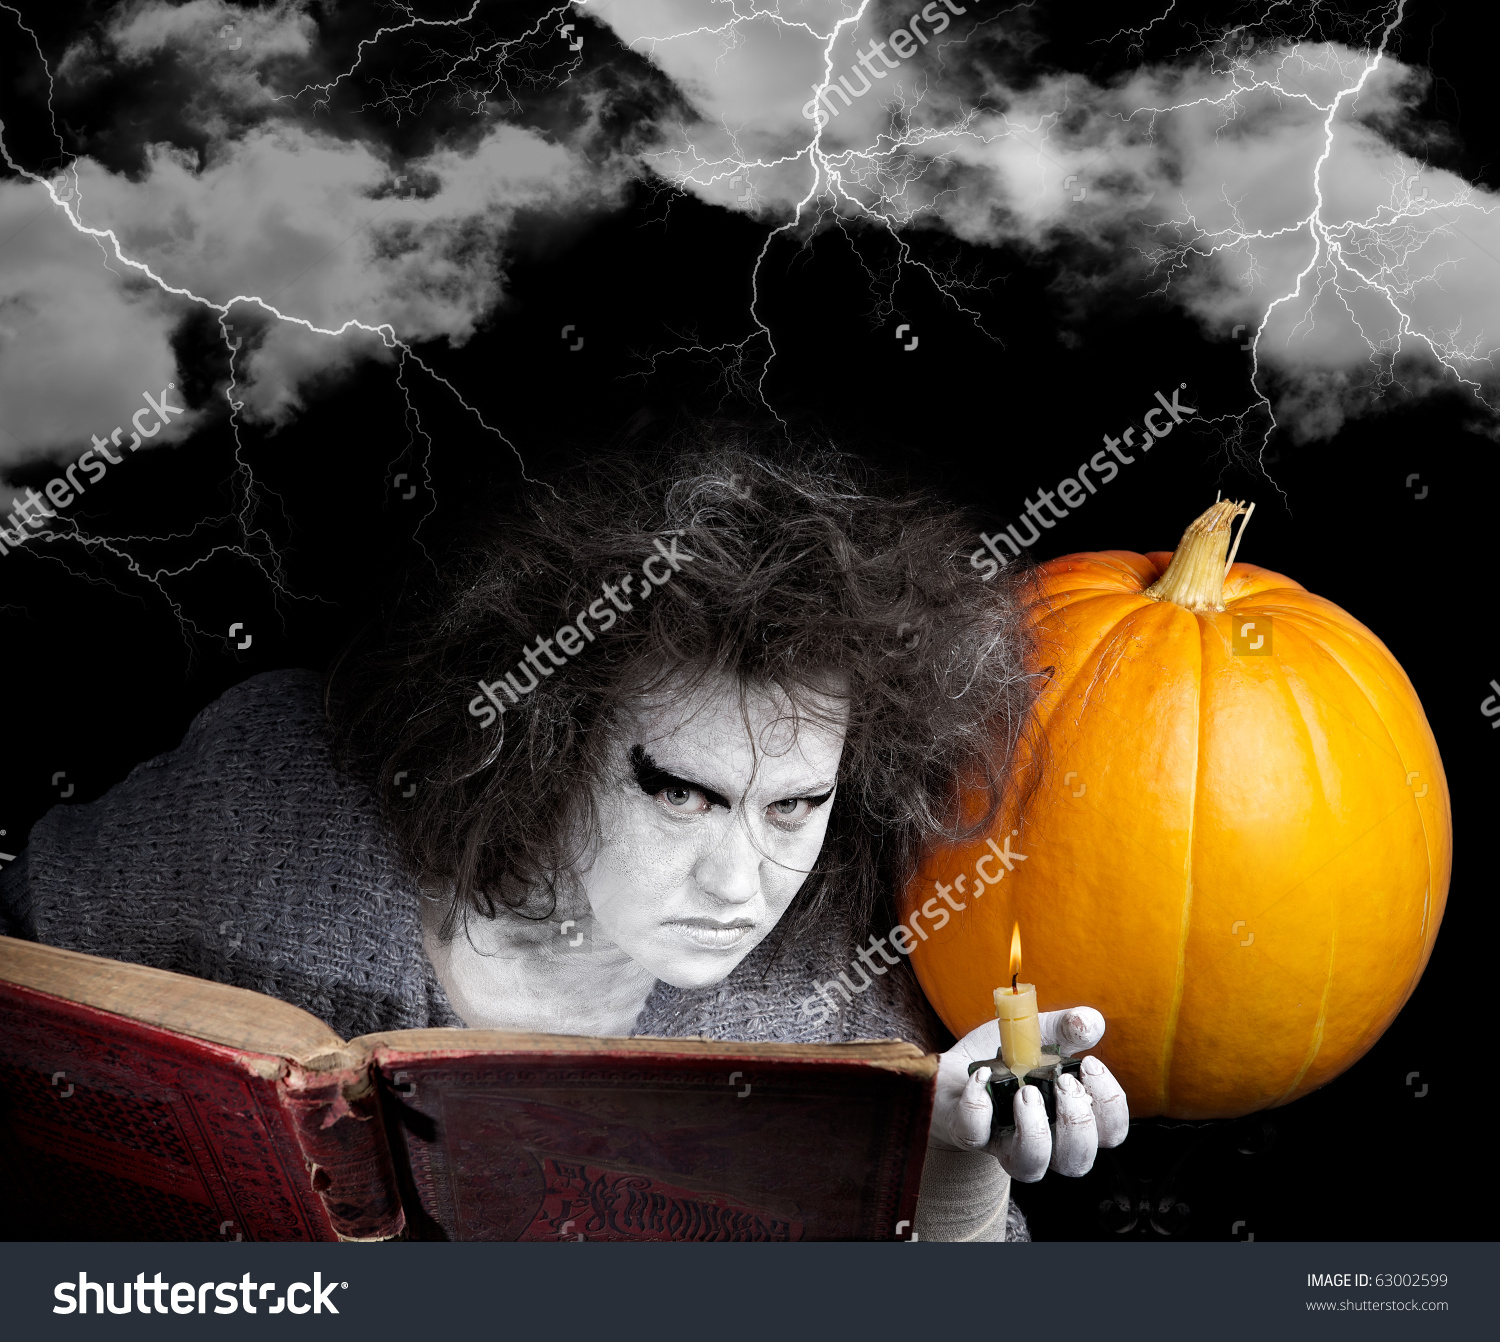 stock-photo-witch-with-a-magic-book-and-pumpkin-halloween-theme-63002599